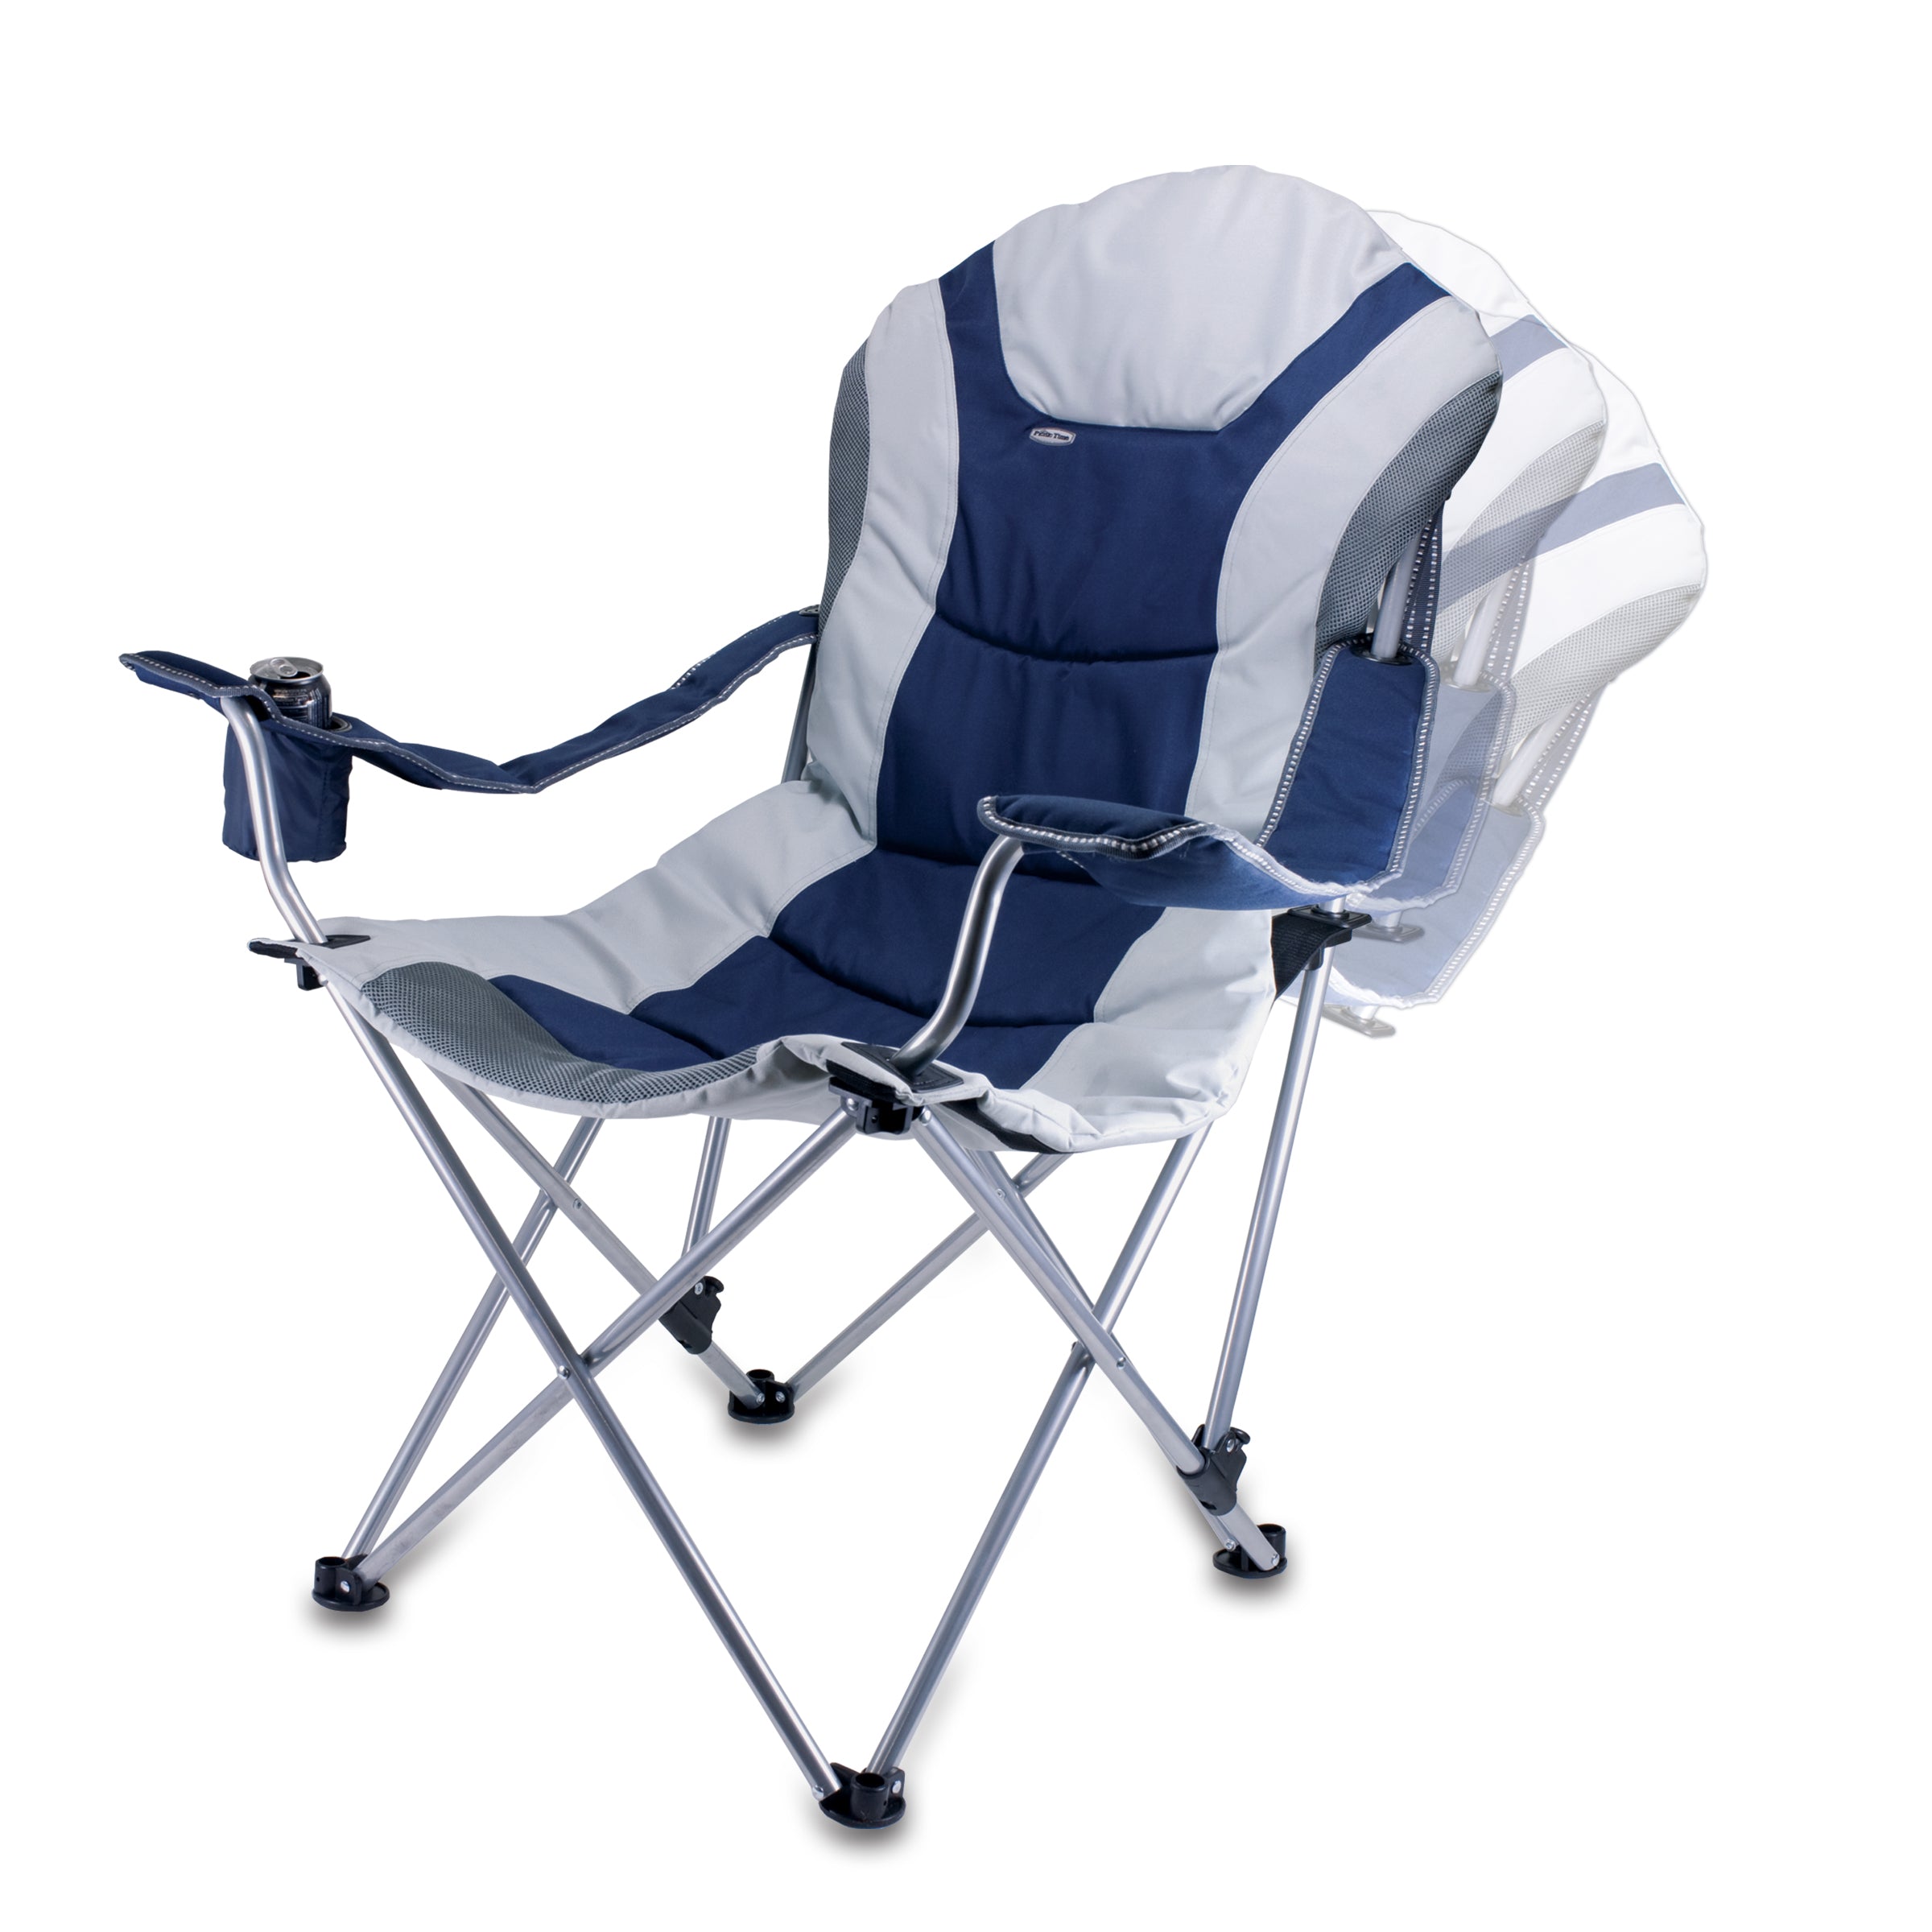 Los Angeles Dodgers - Reclining Camp Chair